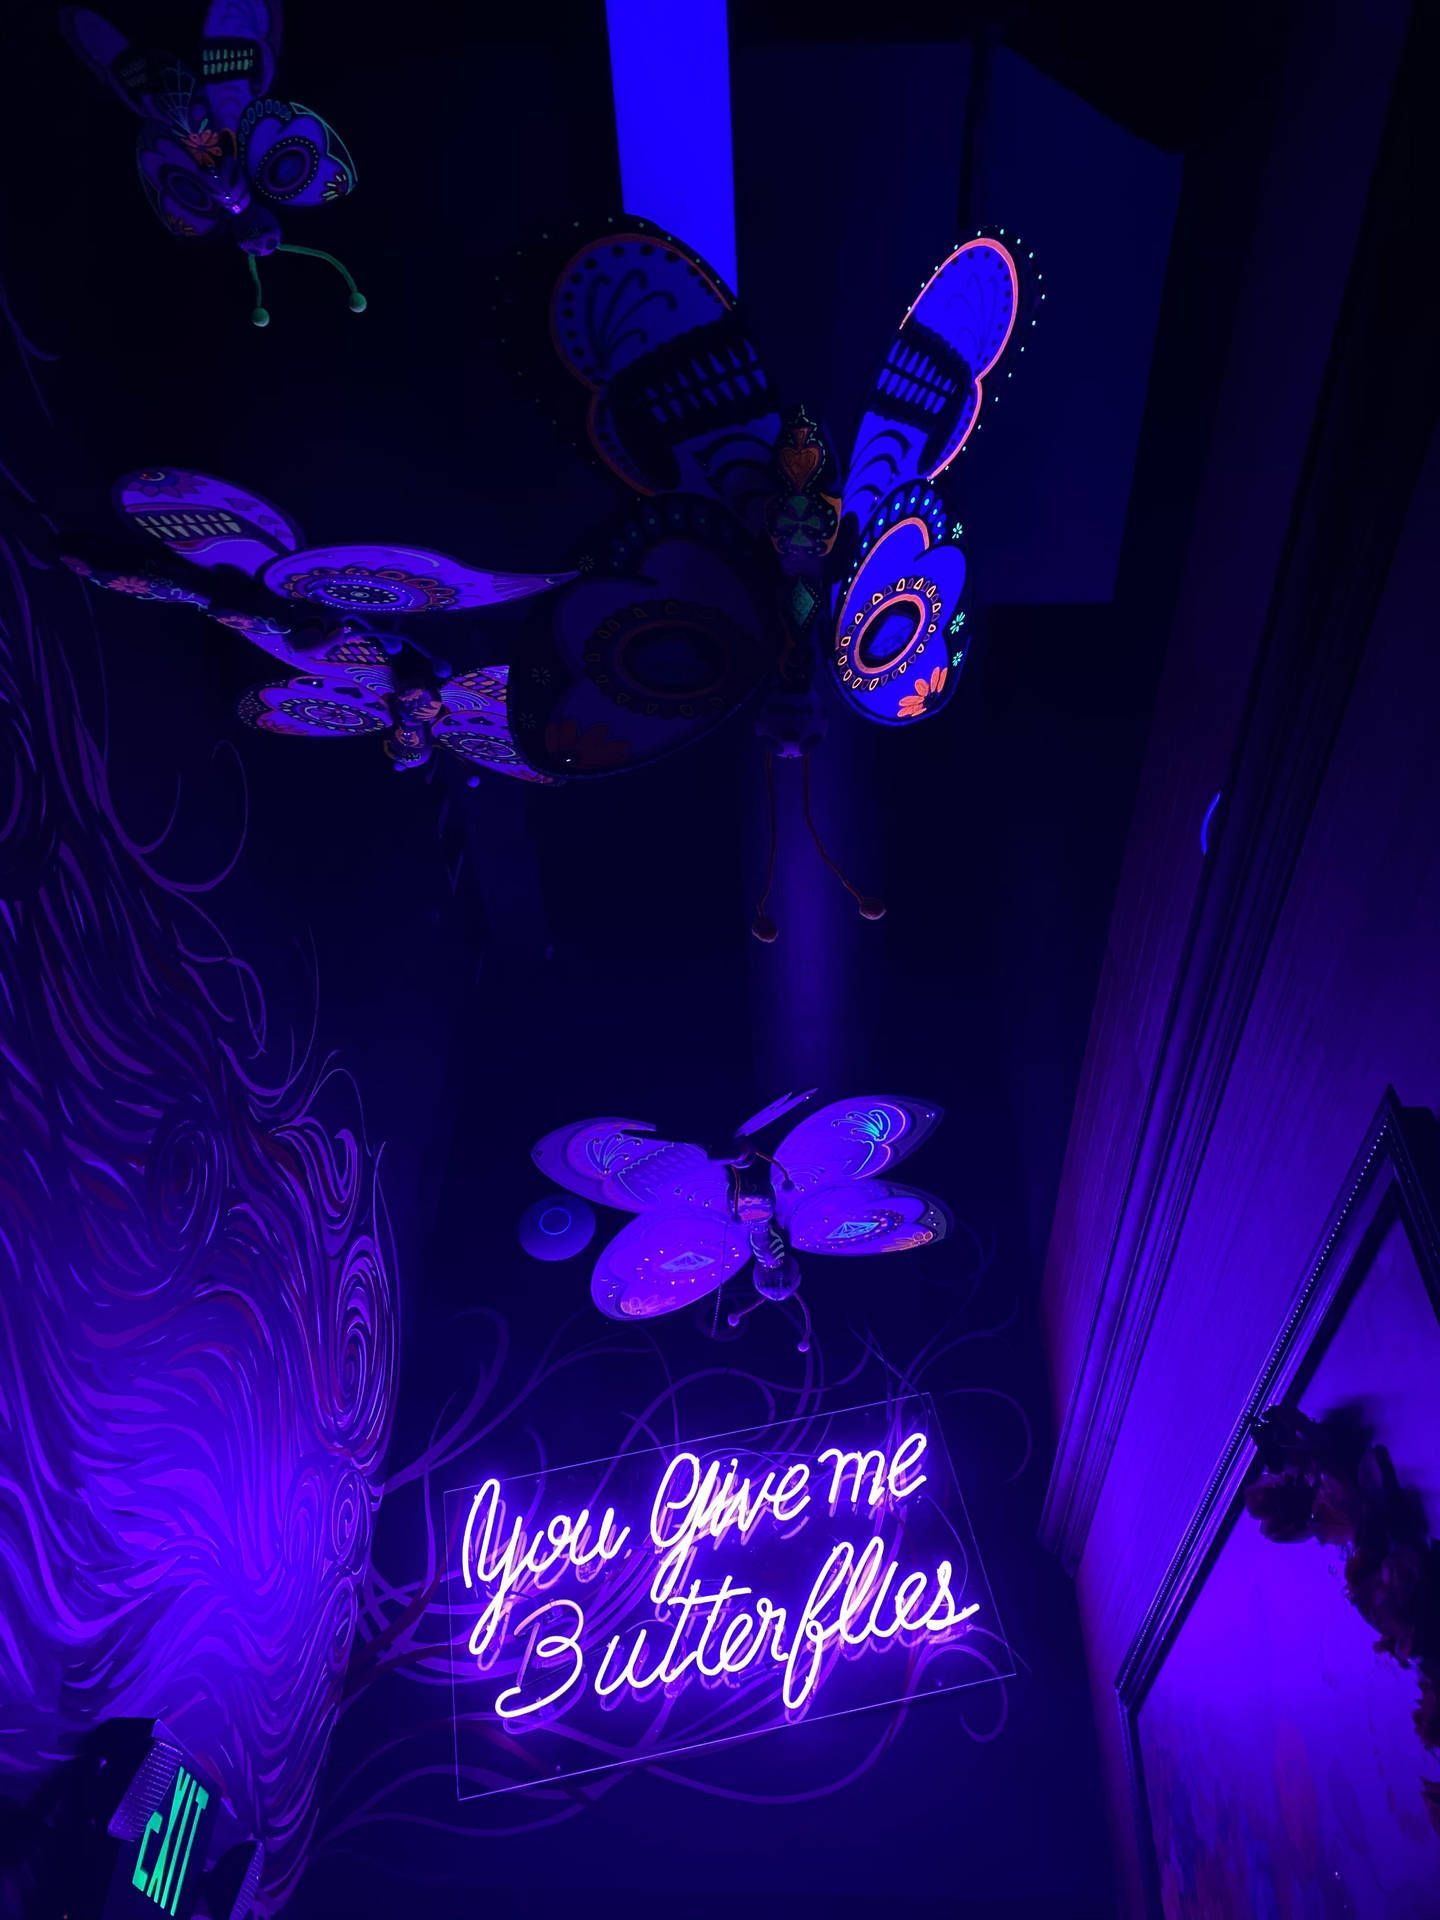 A neon sign that says you give the butterflies - Neon blue, blue